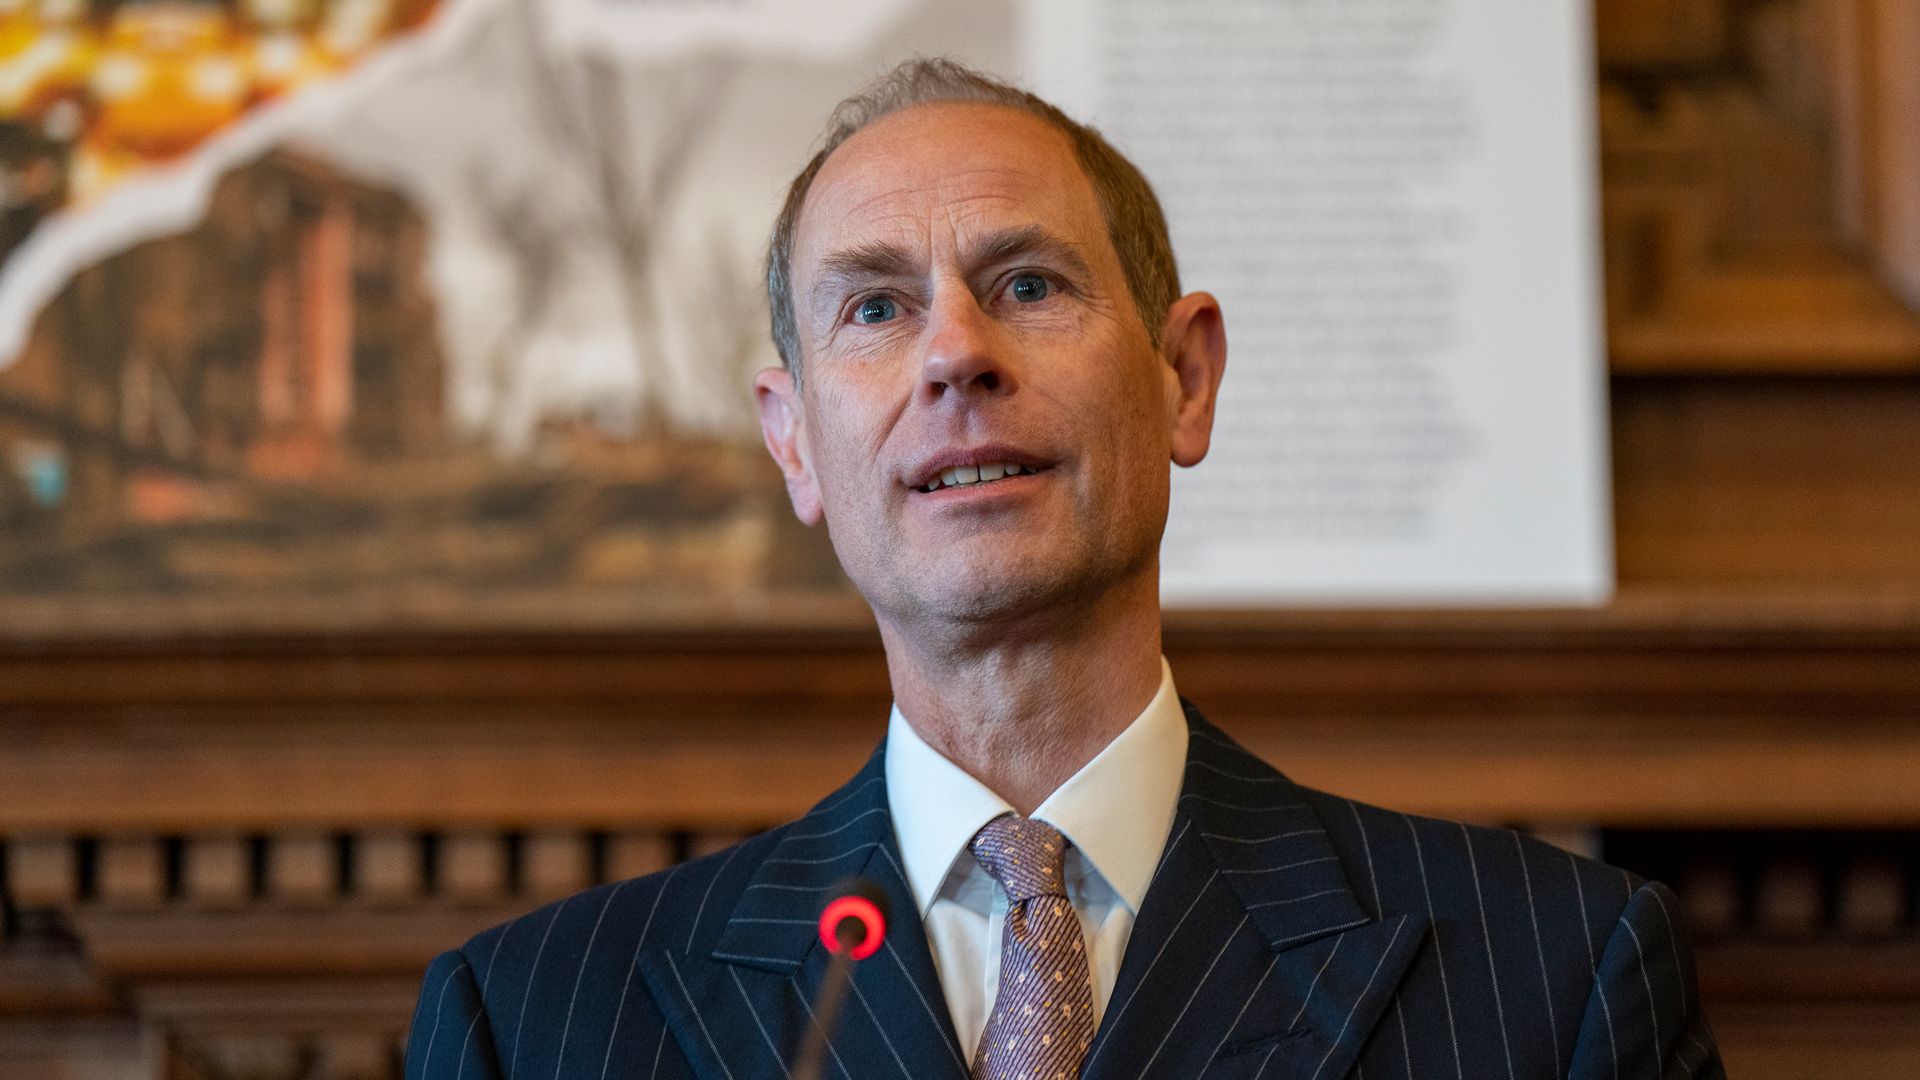 Prince Edward in a suit giving a speech